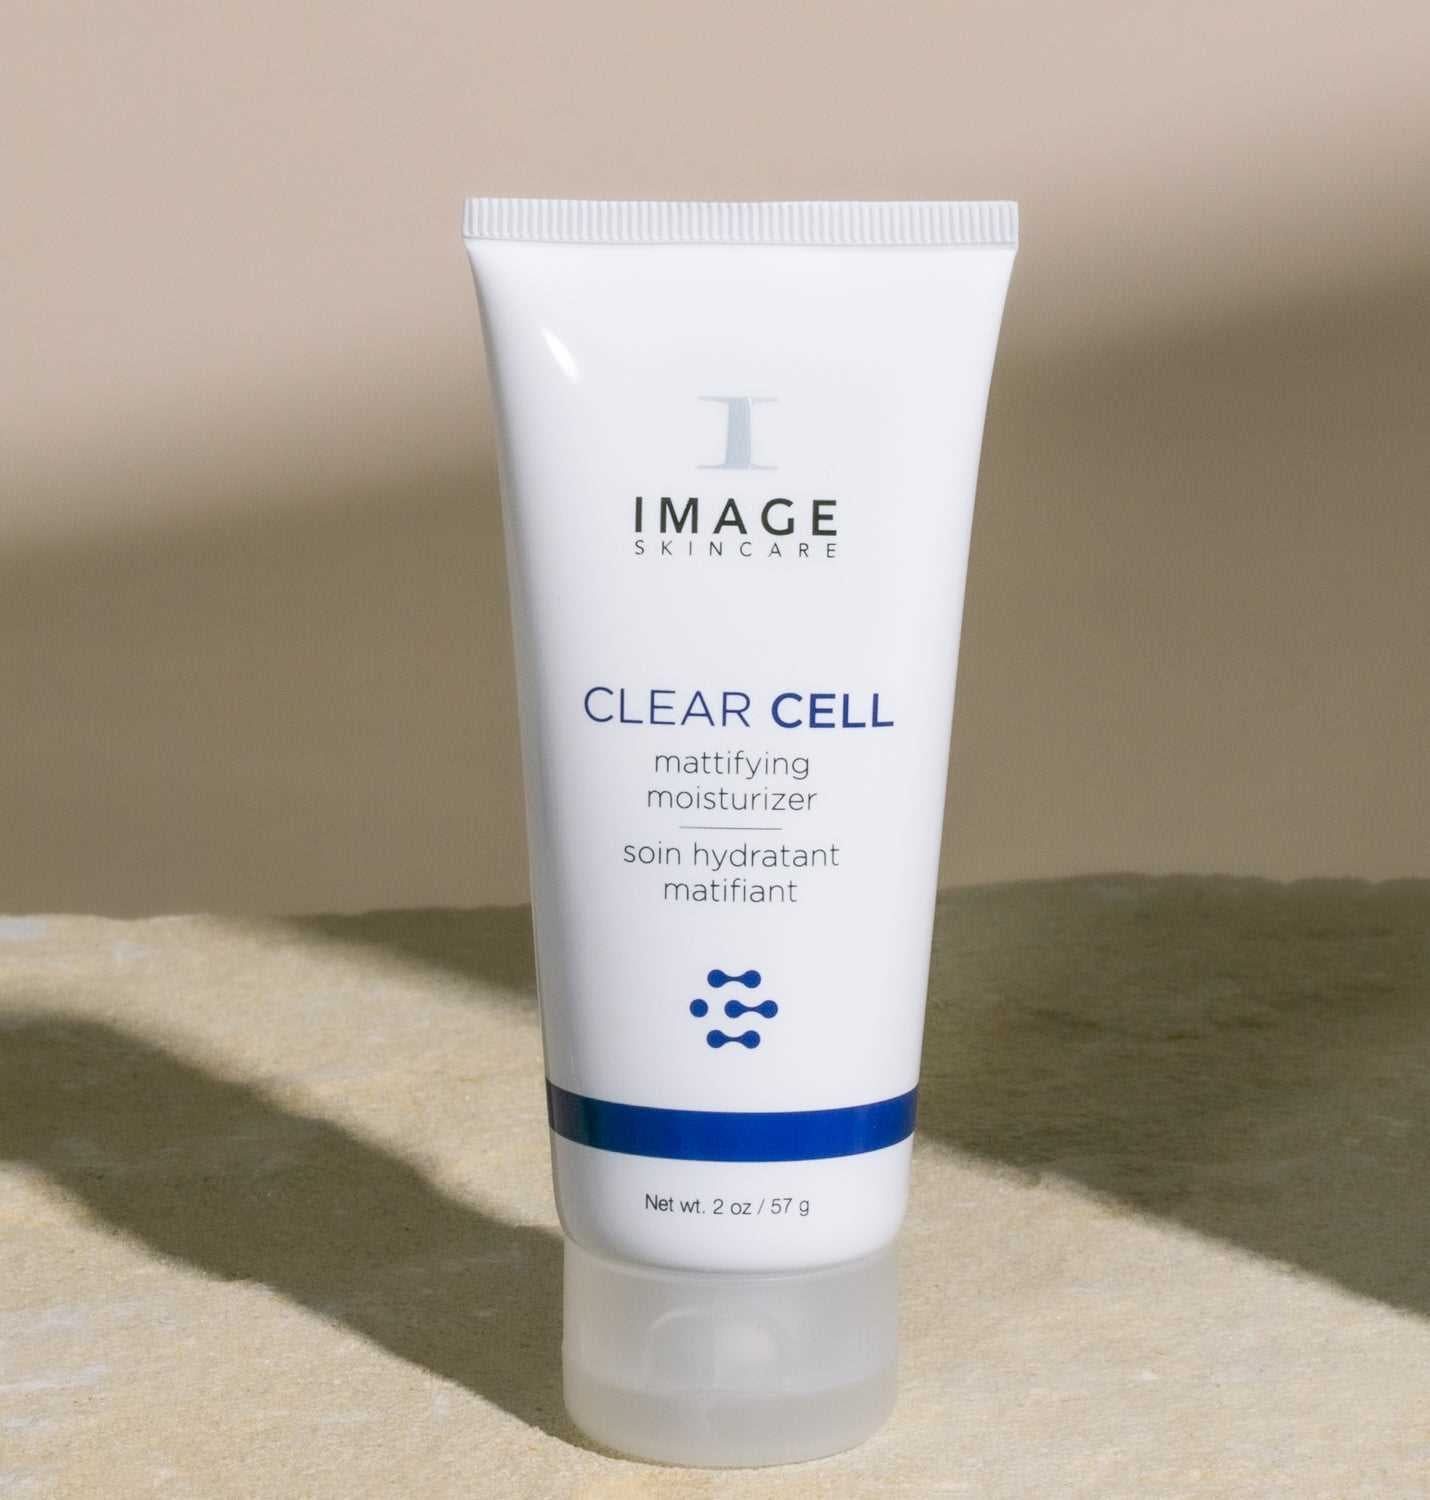 CLEAR CELL Mattifying Moisturizer Image Skincare